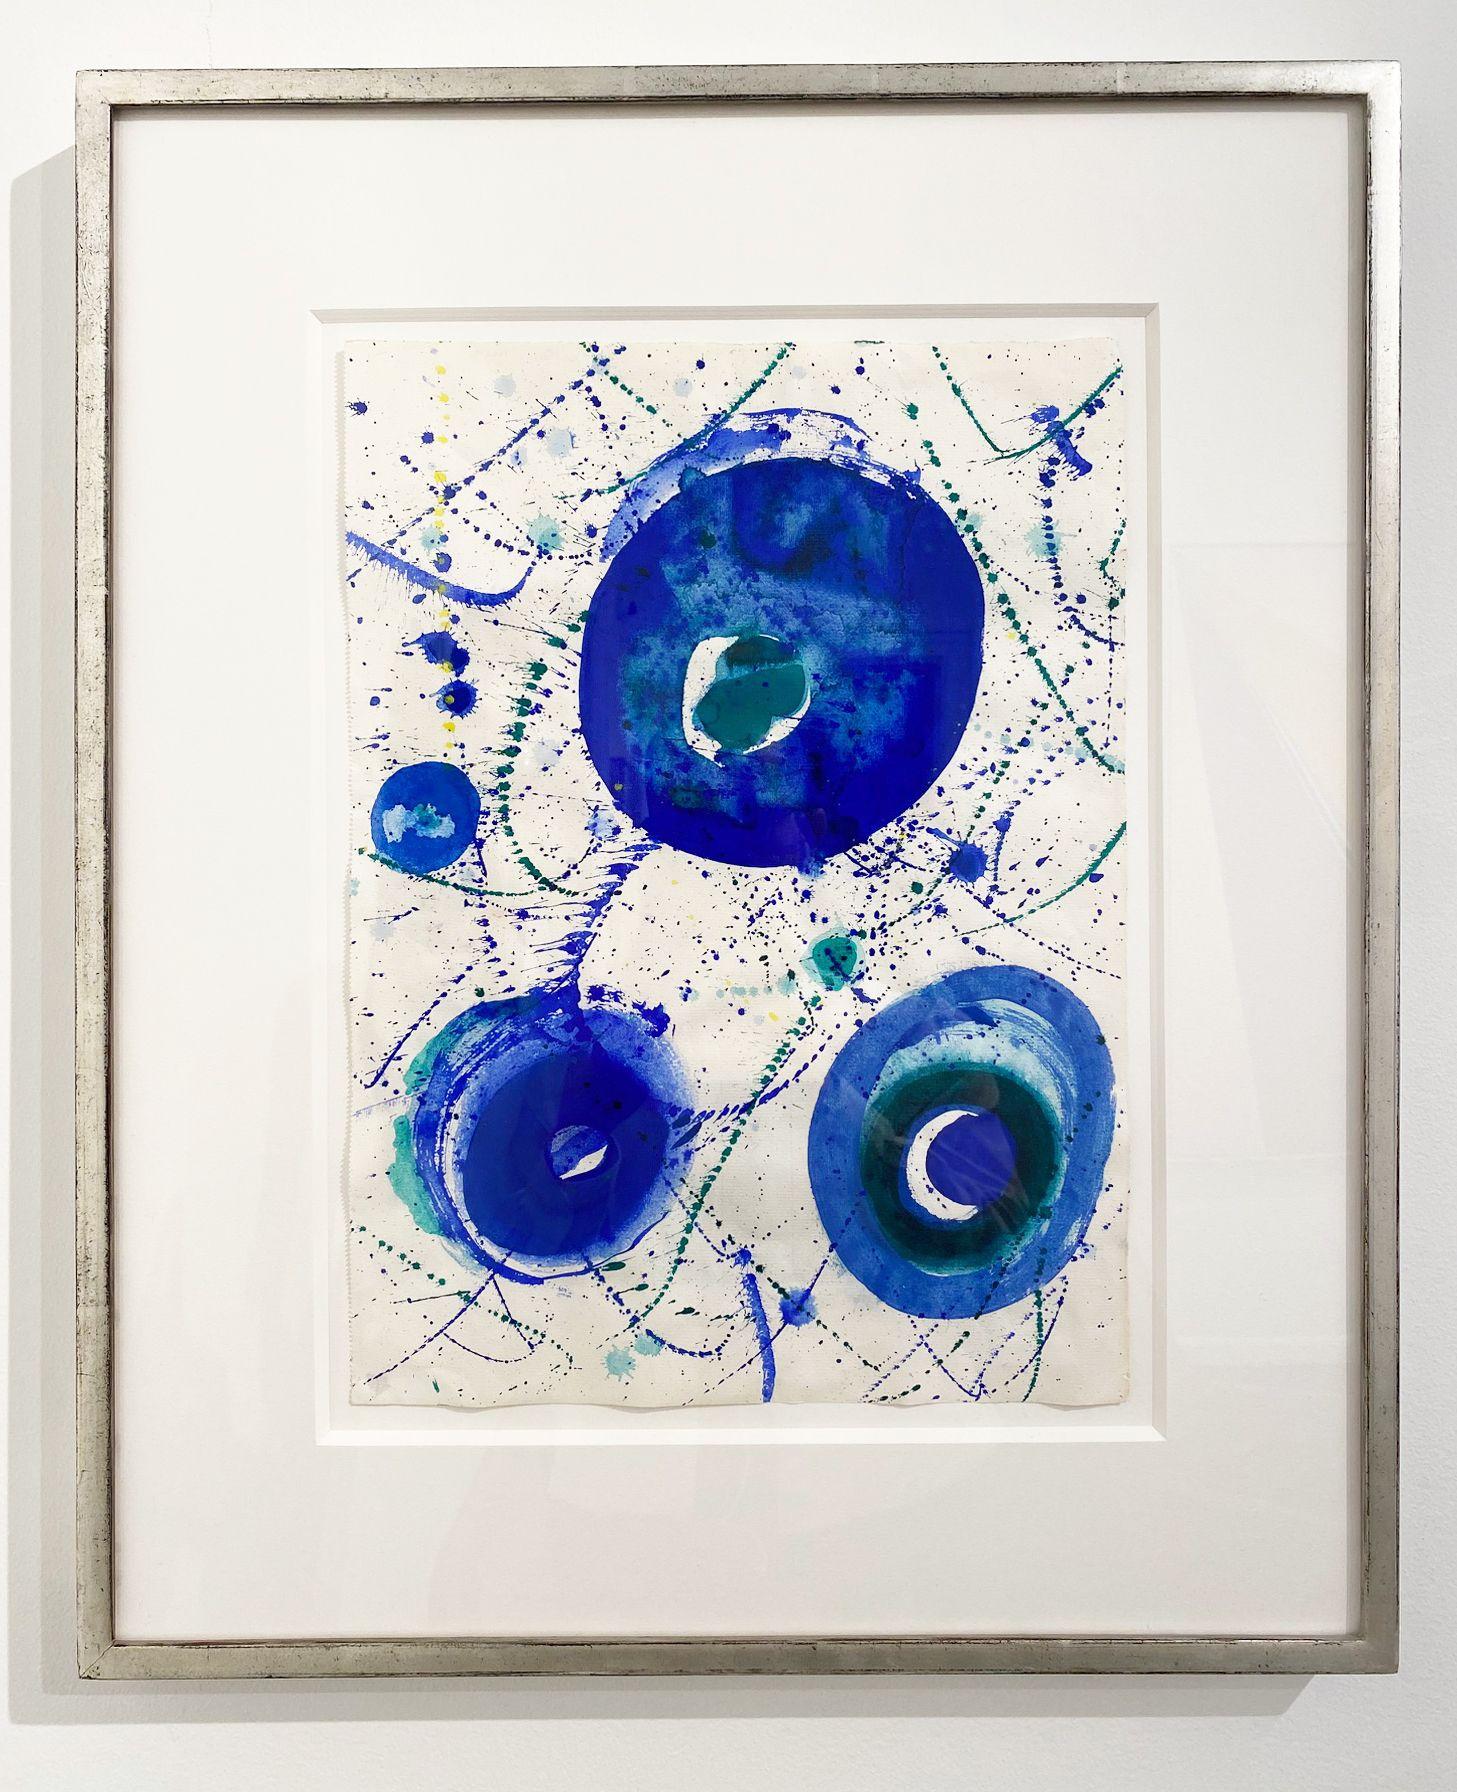 Untitled (Blue Ball) - Painting by Sam Francis